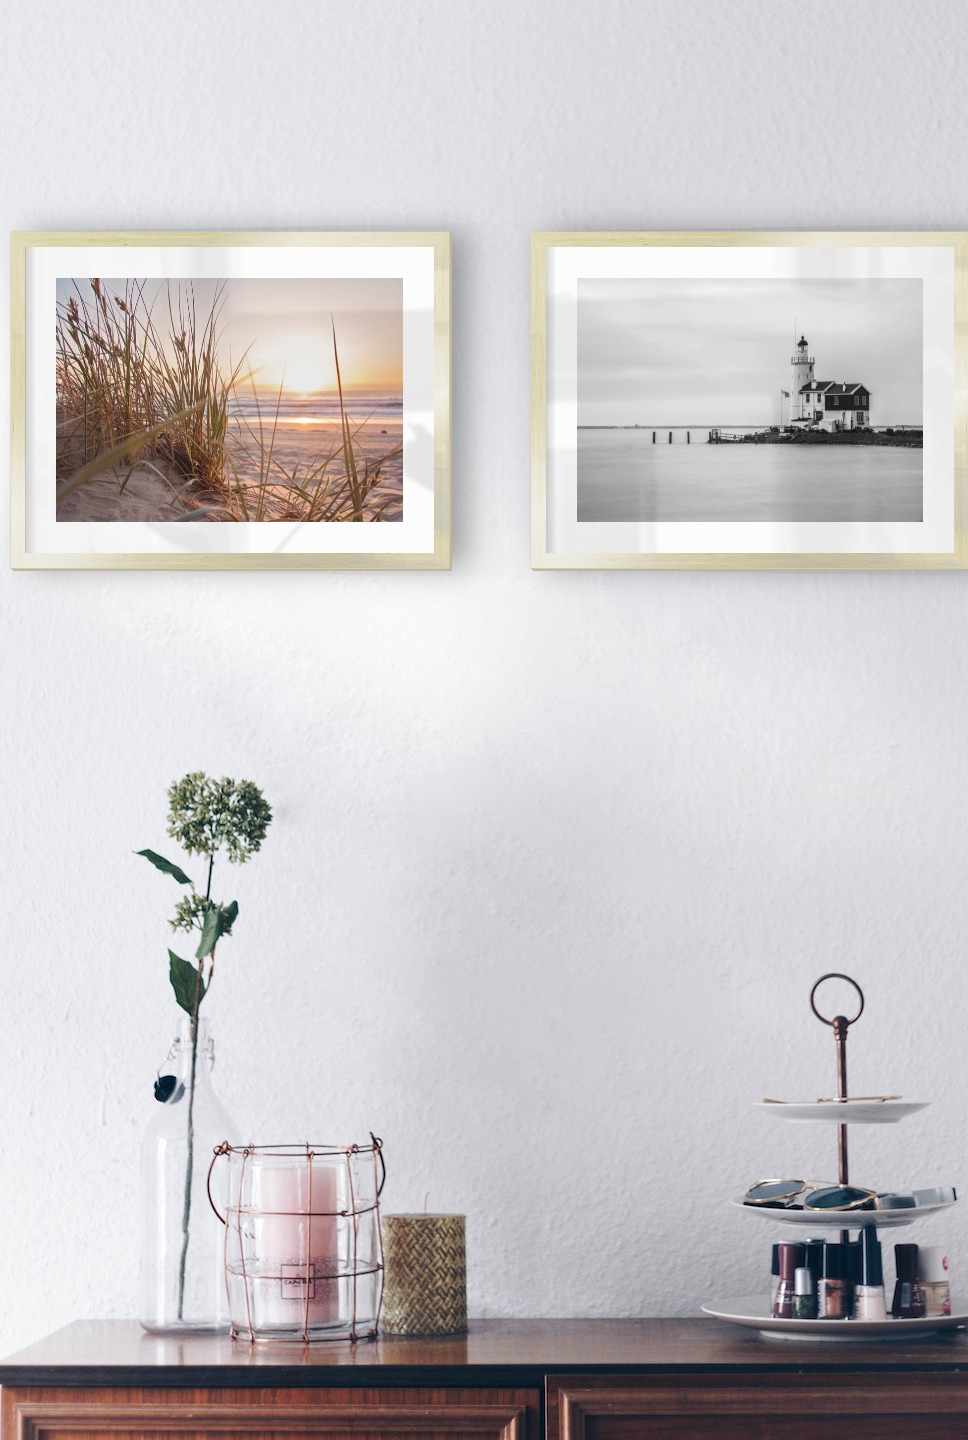 Gallery wall with picture frames in gold in sizes 30x40 with prints "Straw on the beach" and "Pier with building"